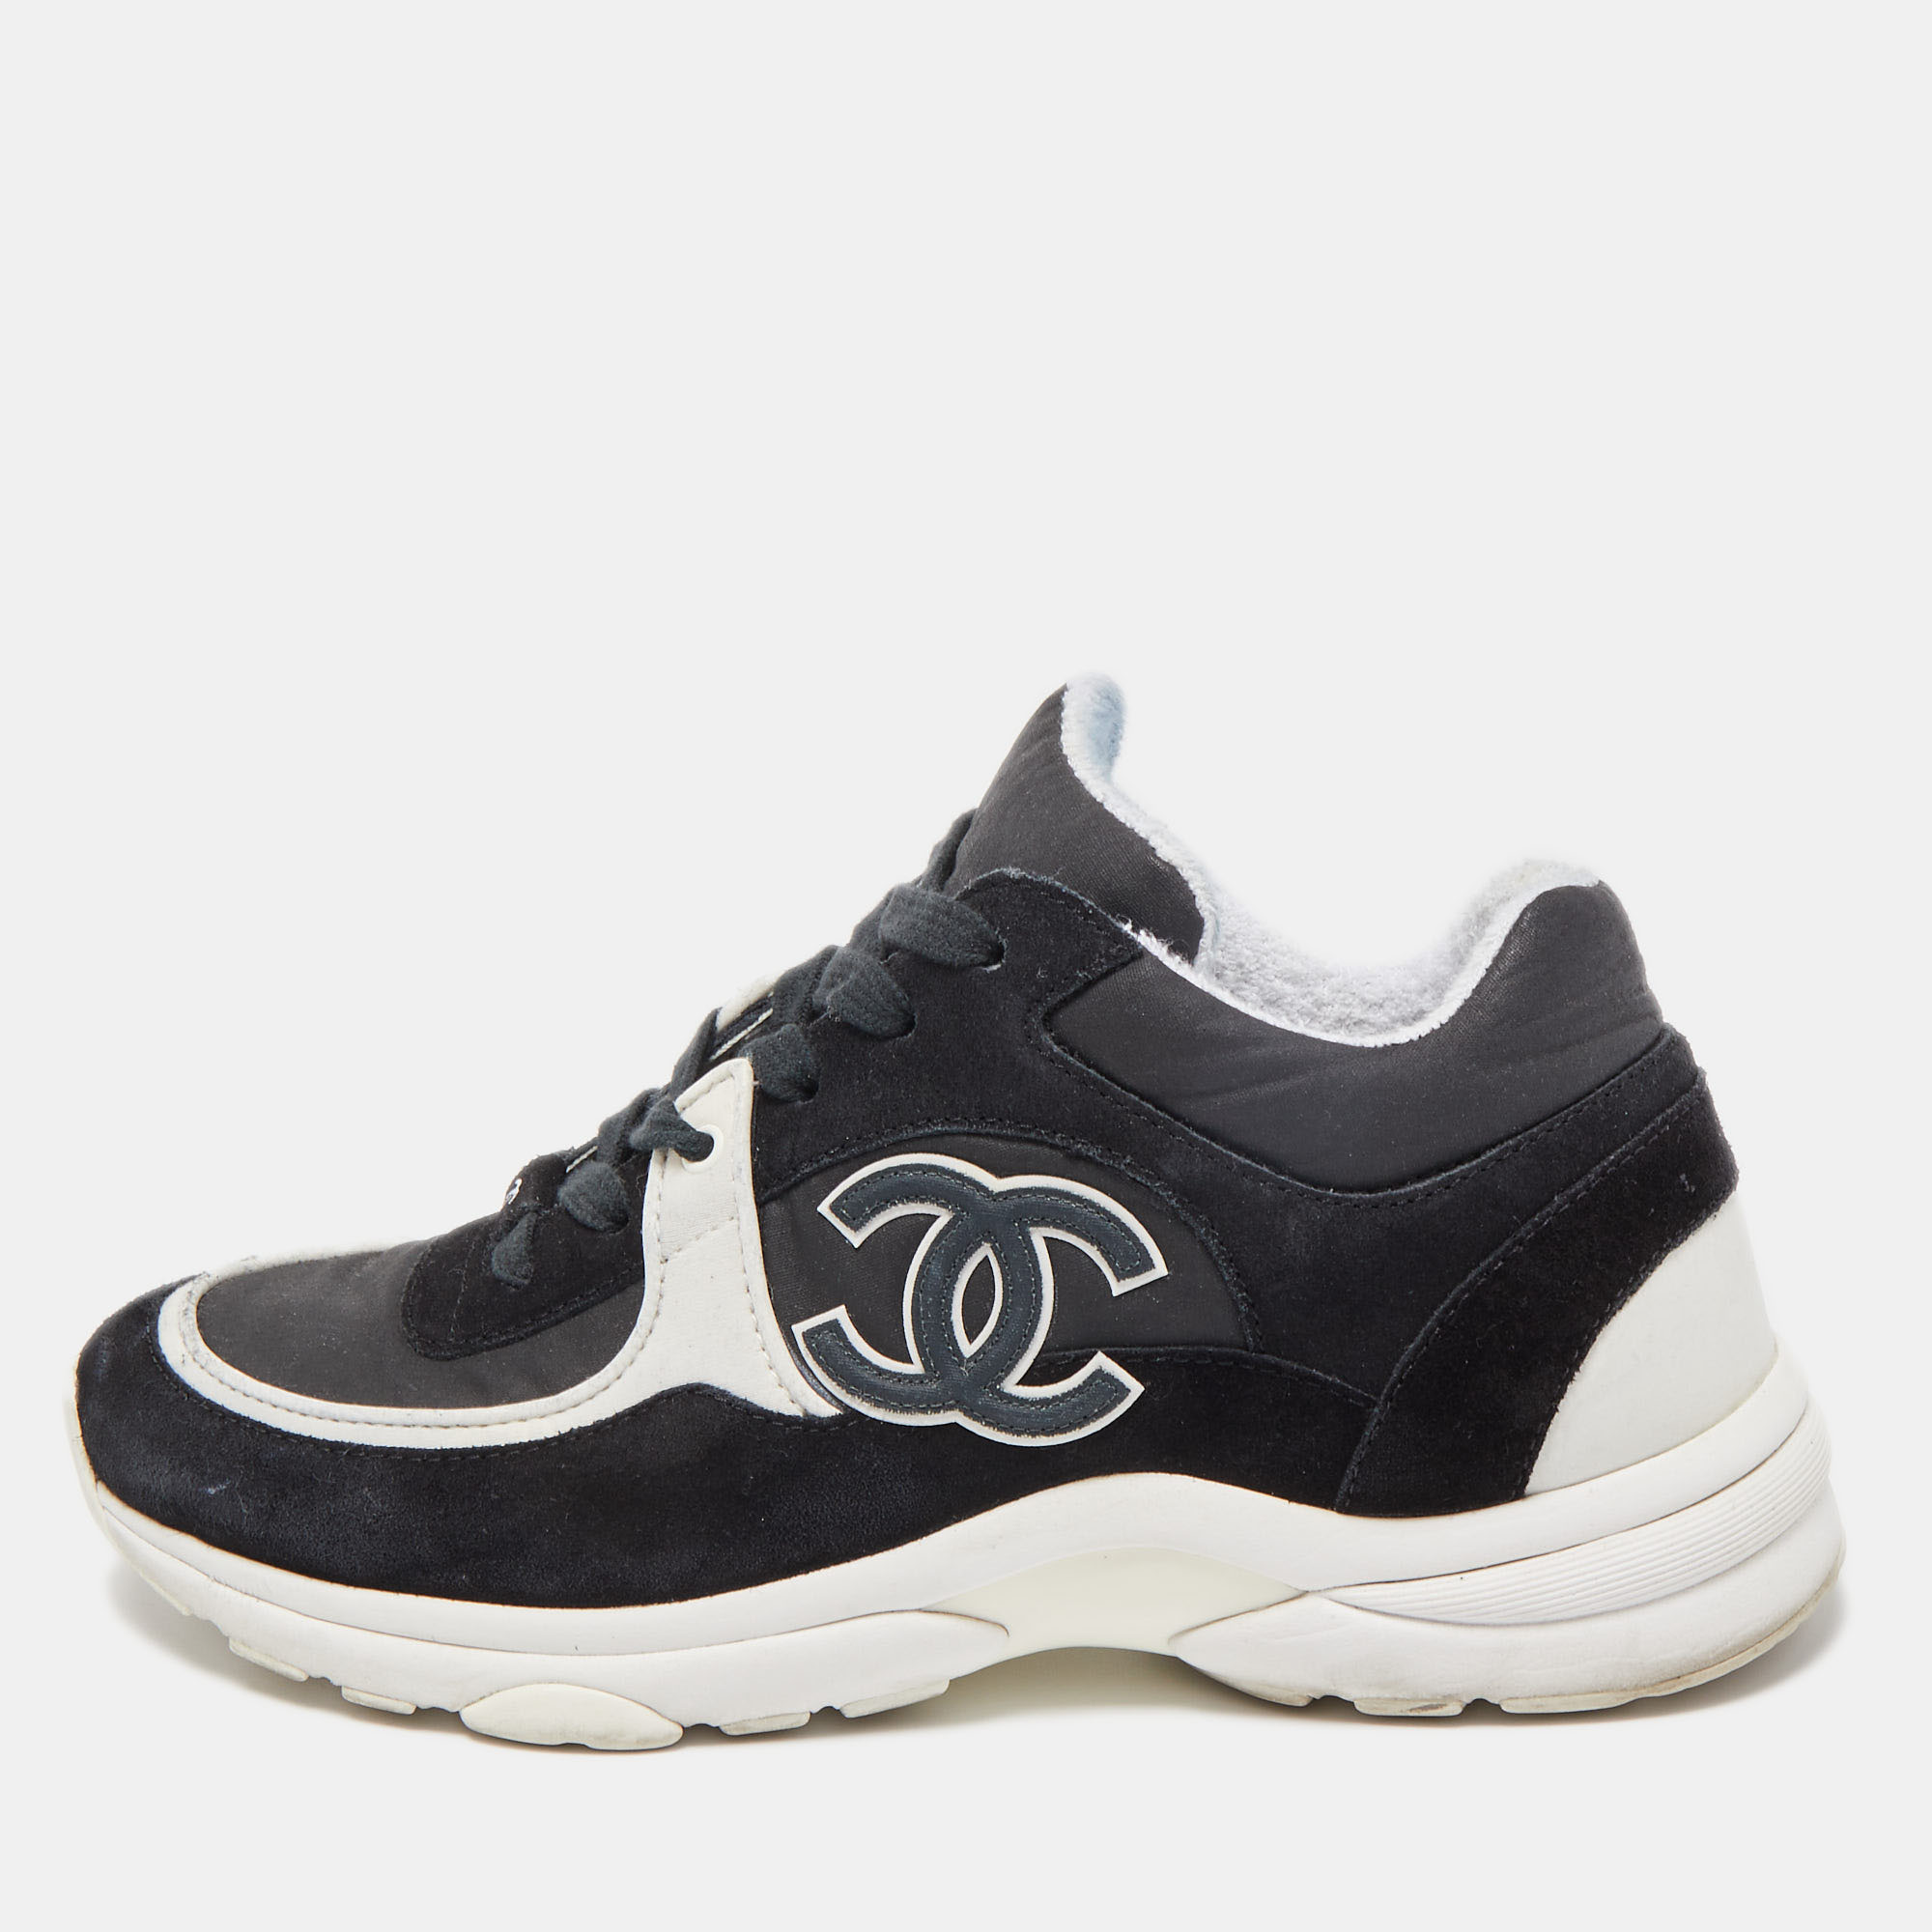 Chanel Chanel cc low top trainer black White